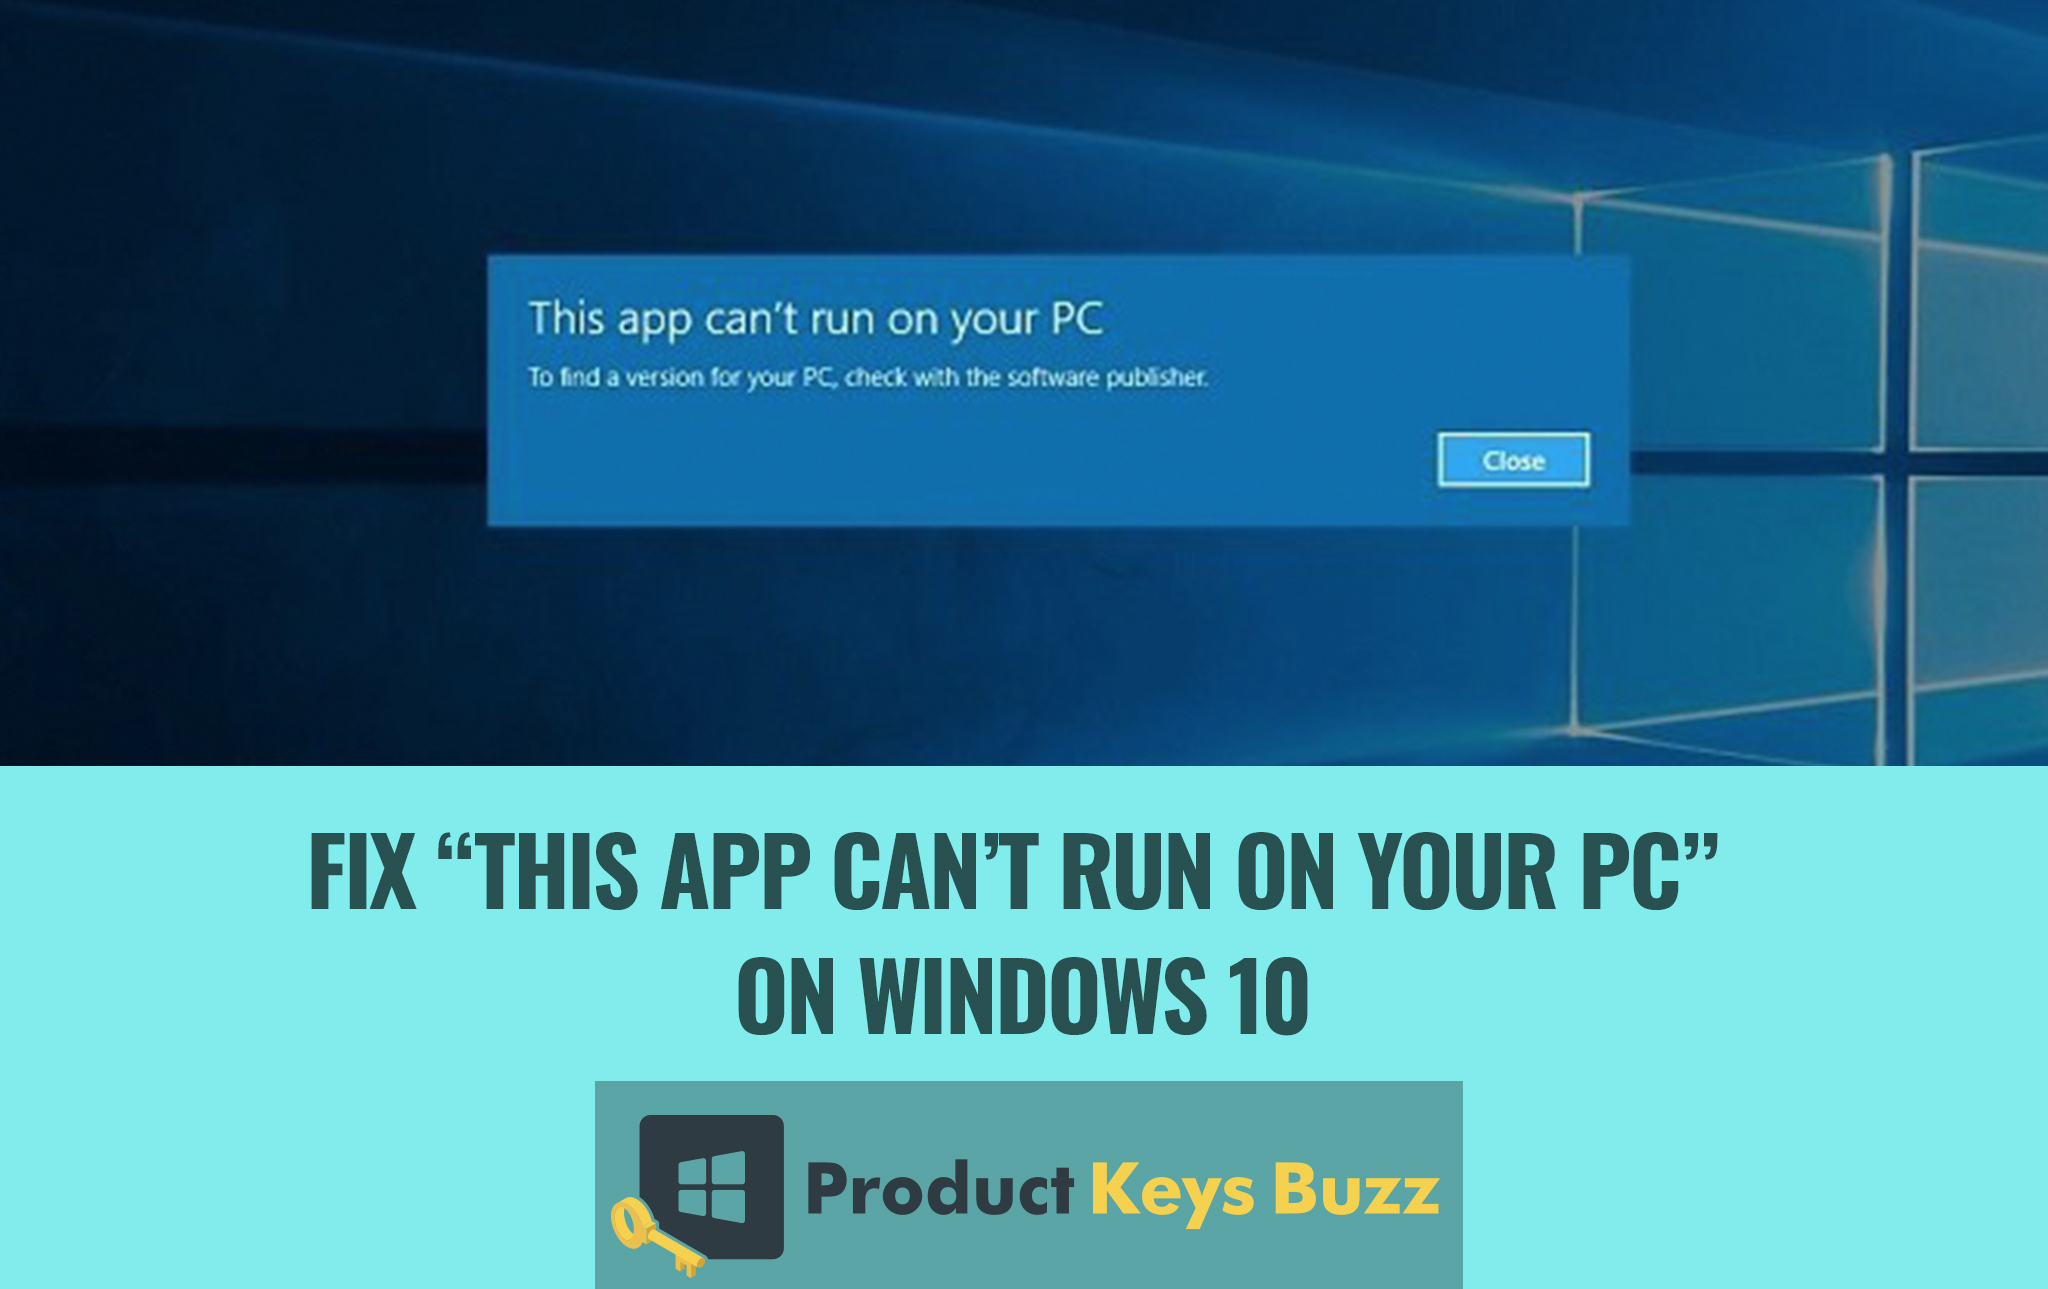 Fix “This app can’t run on your PC” on Windows 10